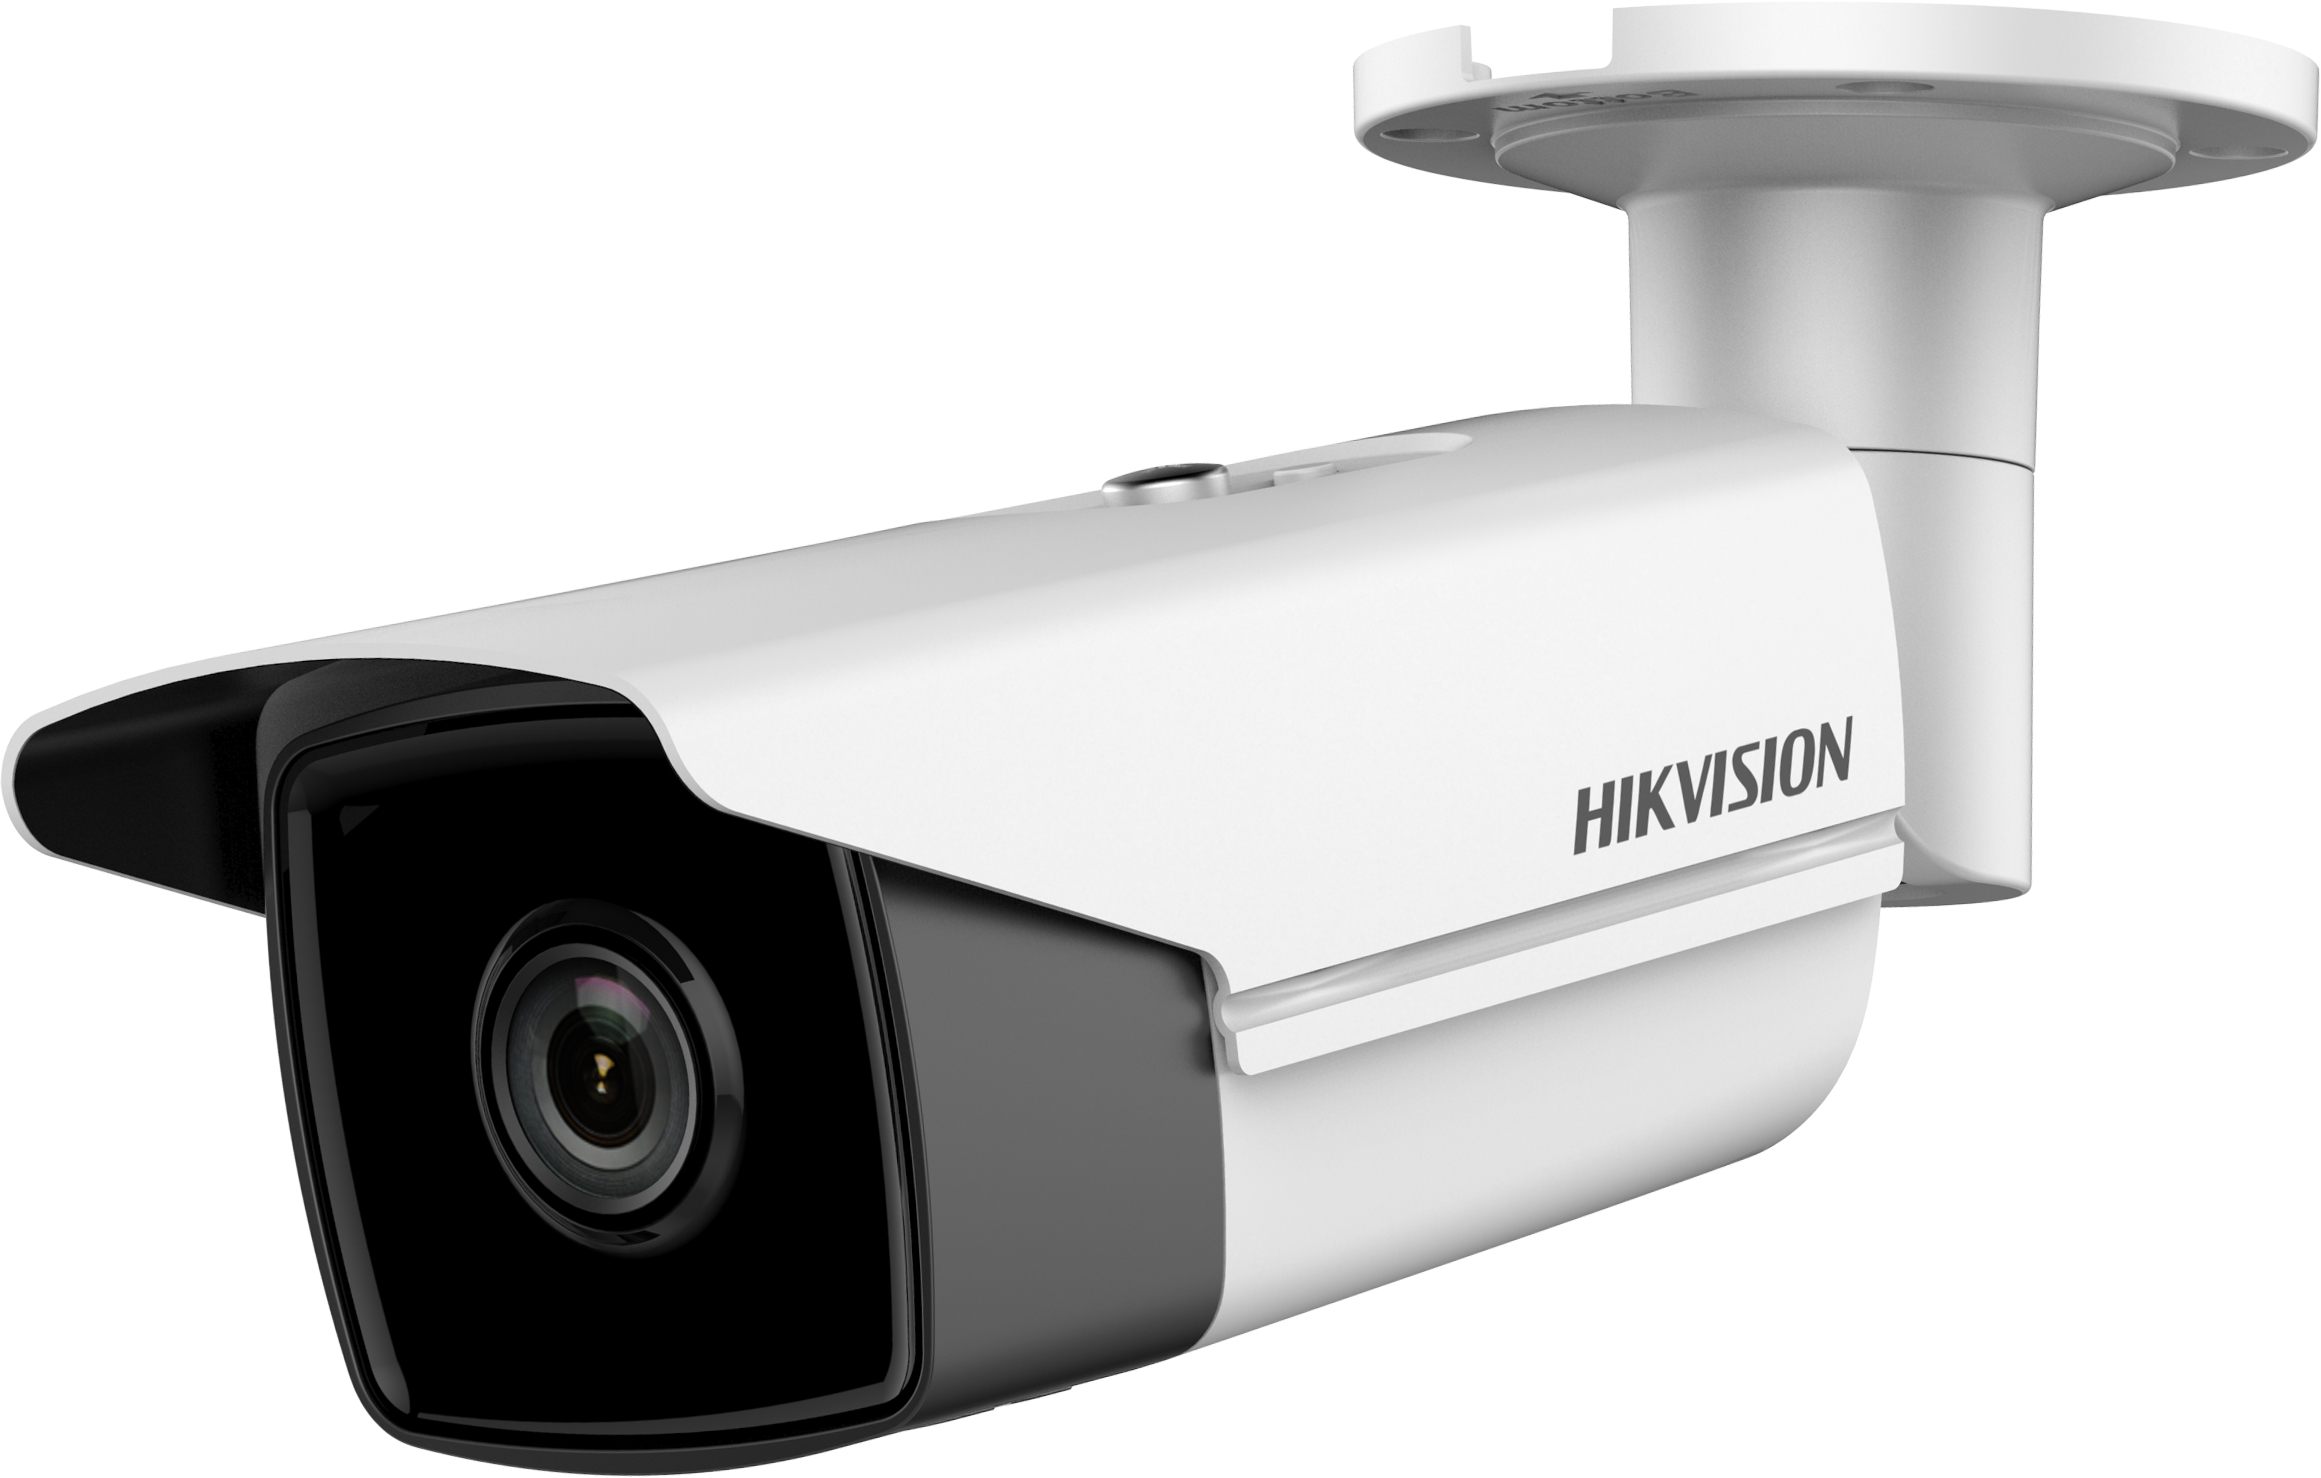 Hikvision IP bullet camera - DS-2CD2T43G0-I5/28, 4MP, lens 2.8mm | Discomp - networking solutions